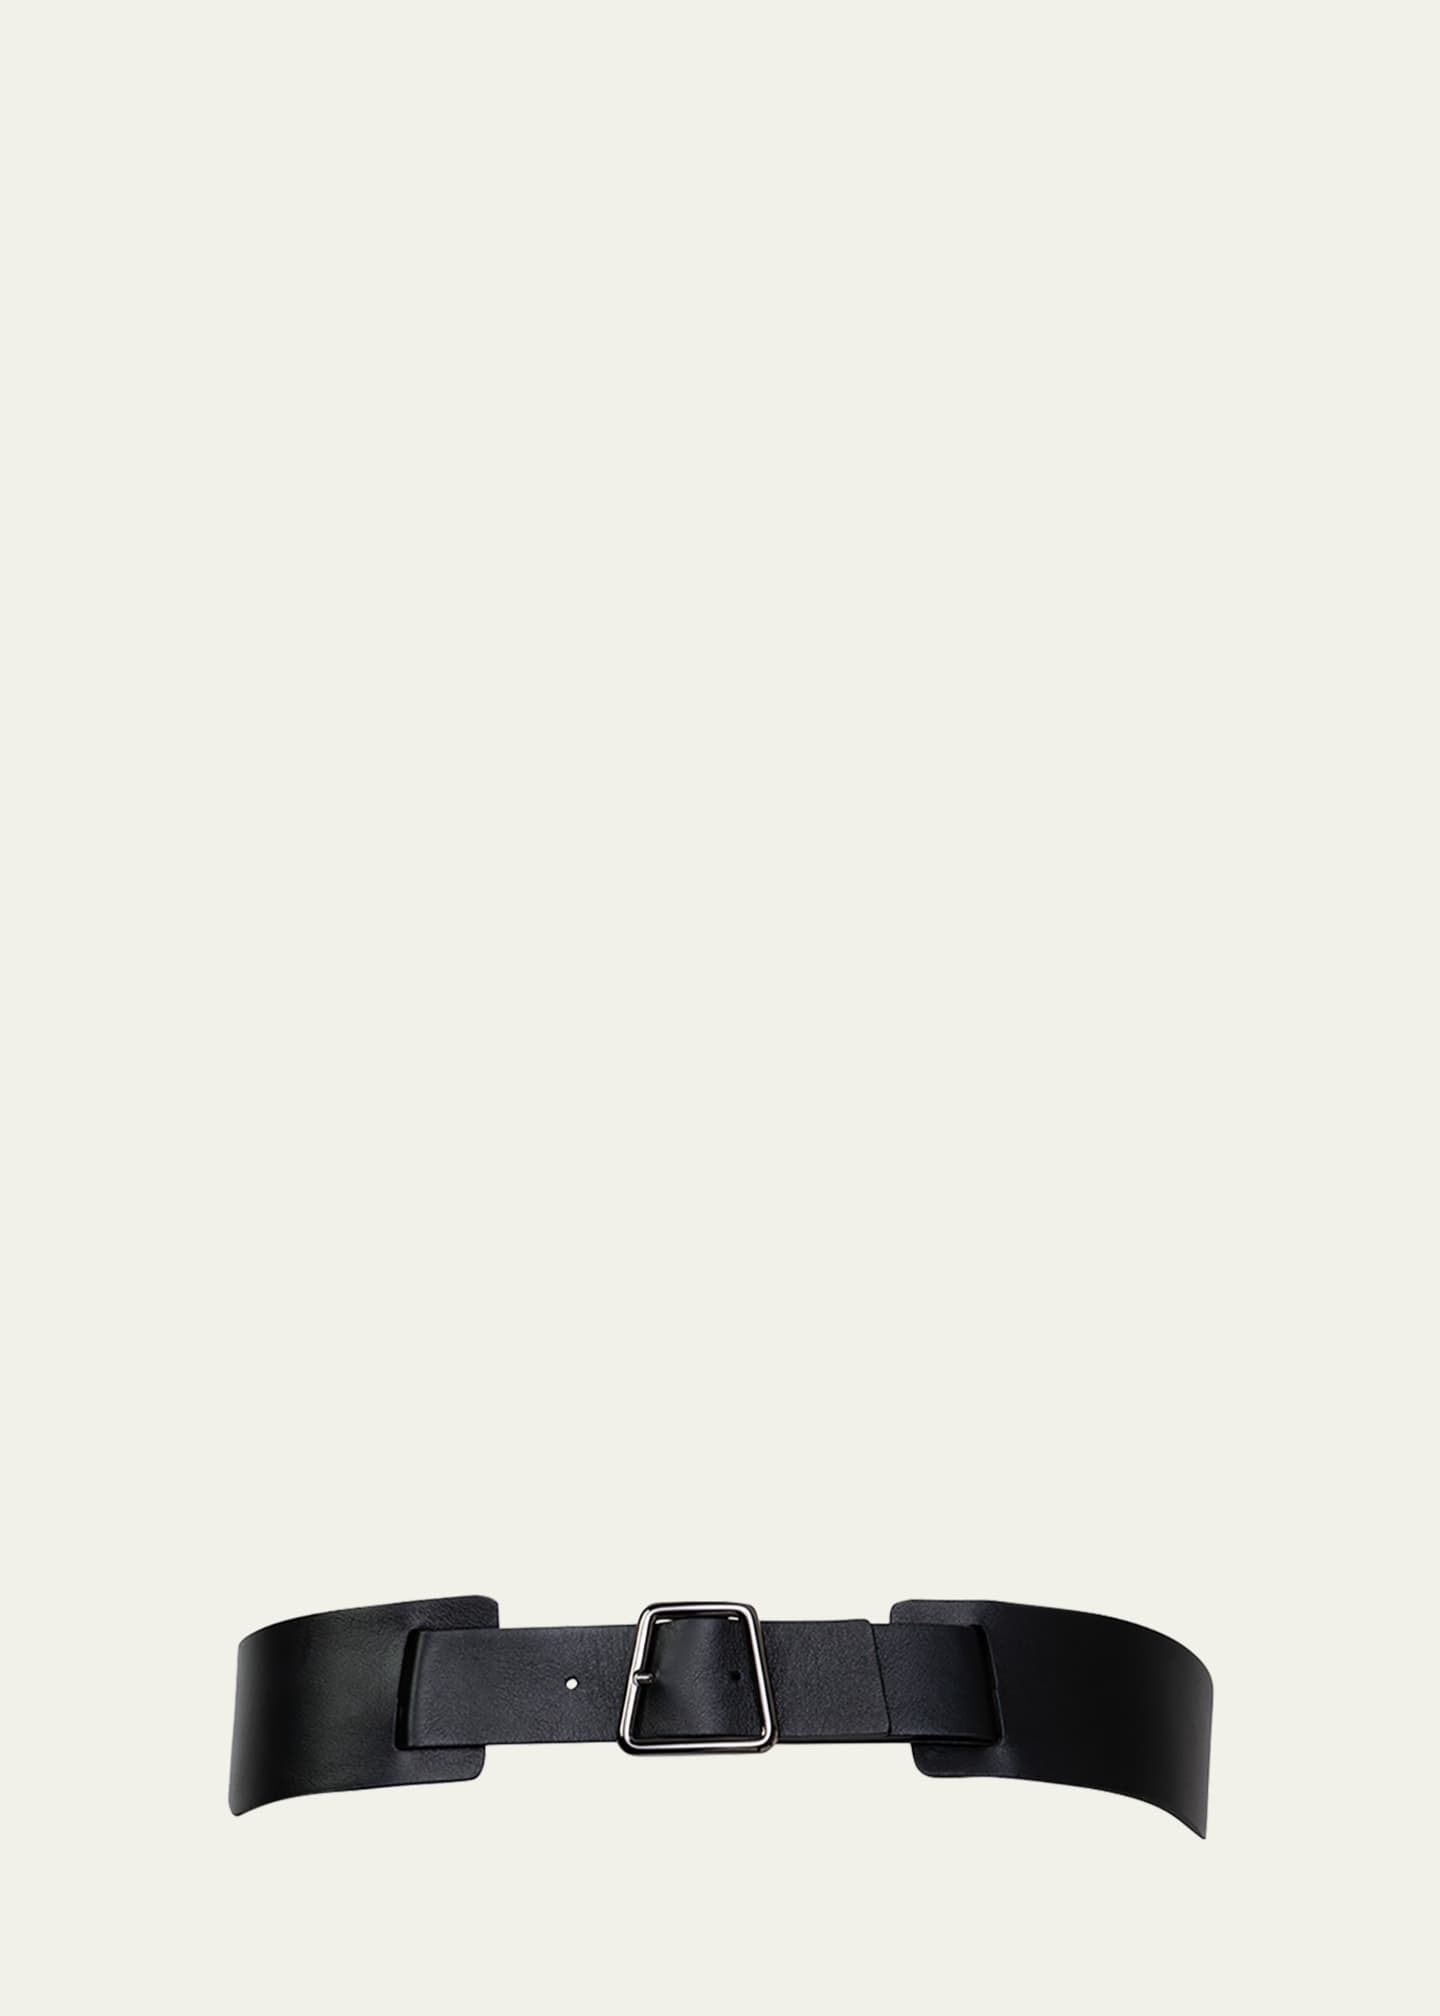 Off-White OW initials Black Leather Belt, Women's, 30in / 75cm, Belts Leather Belts